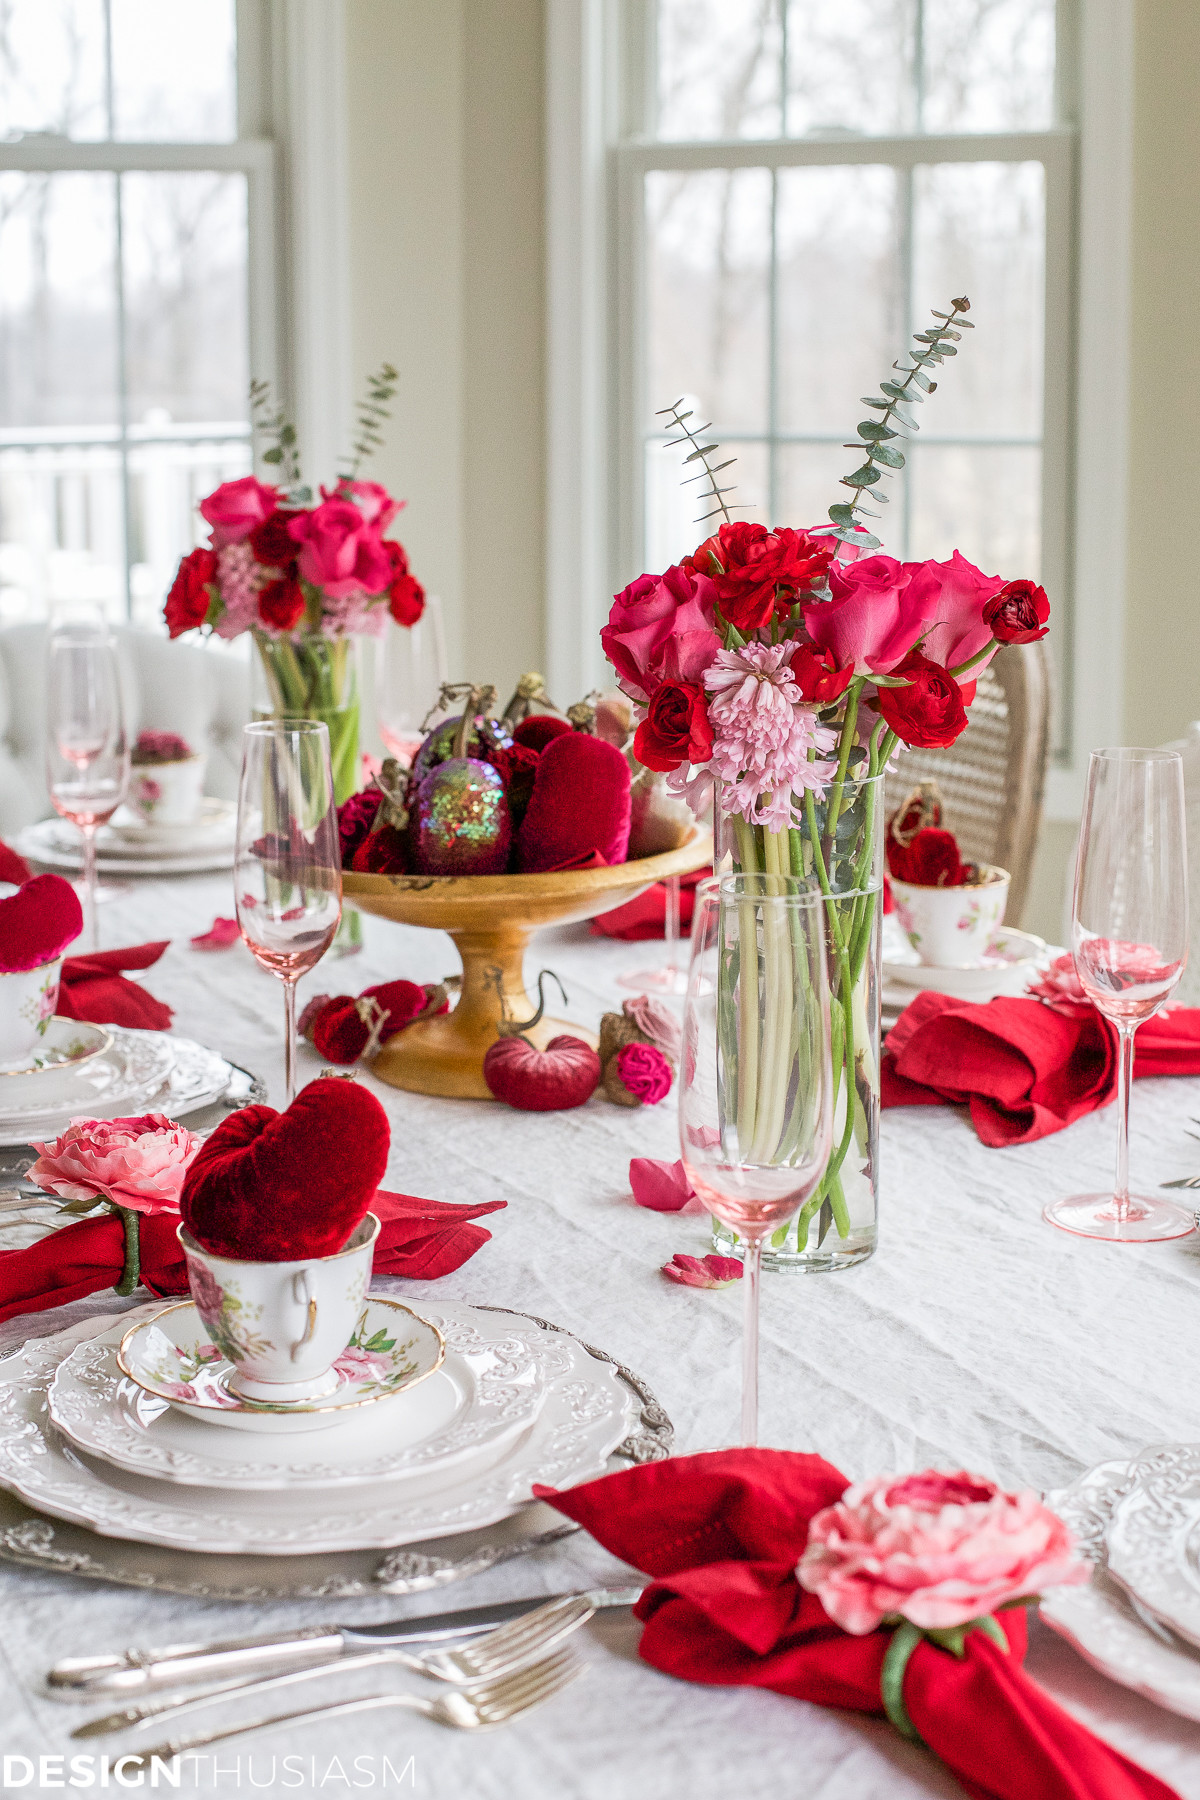 Valentines Day Pic Ideas
 14 Modern Farmhouse Ideas for Valentine s Day